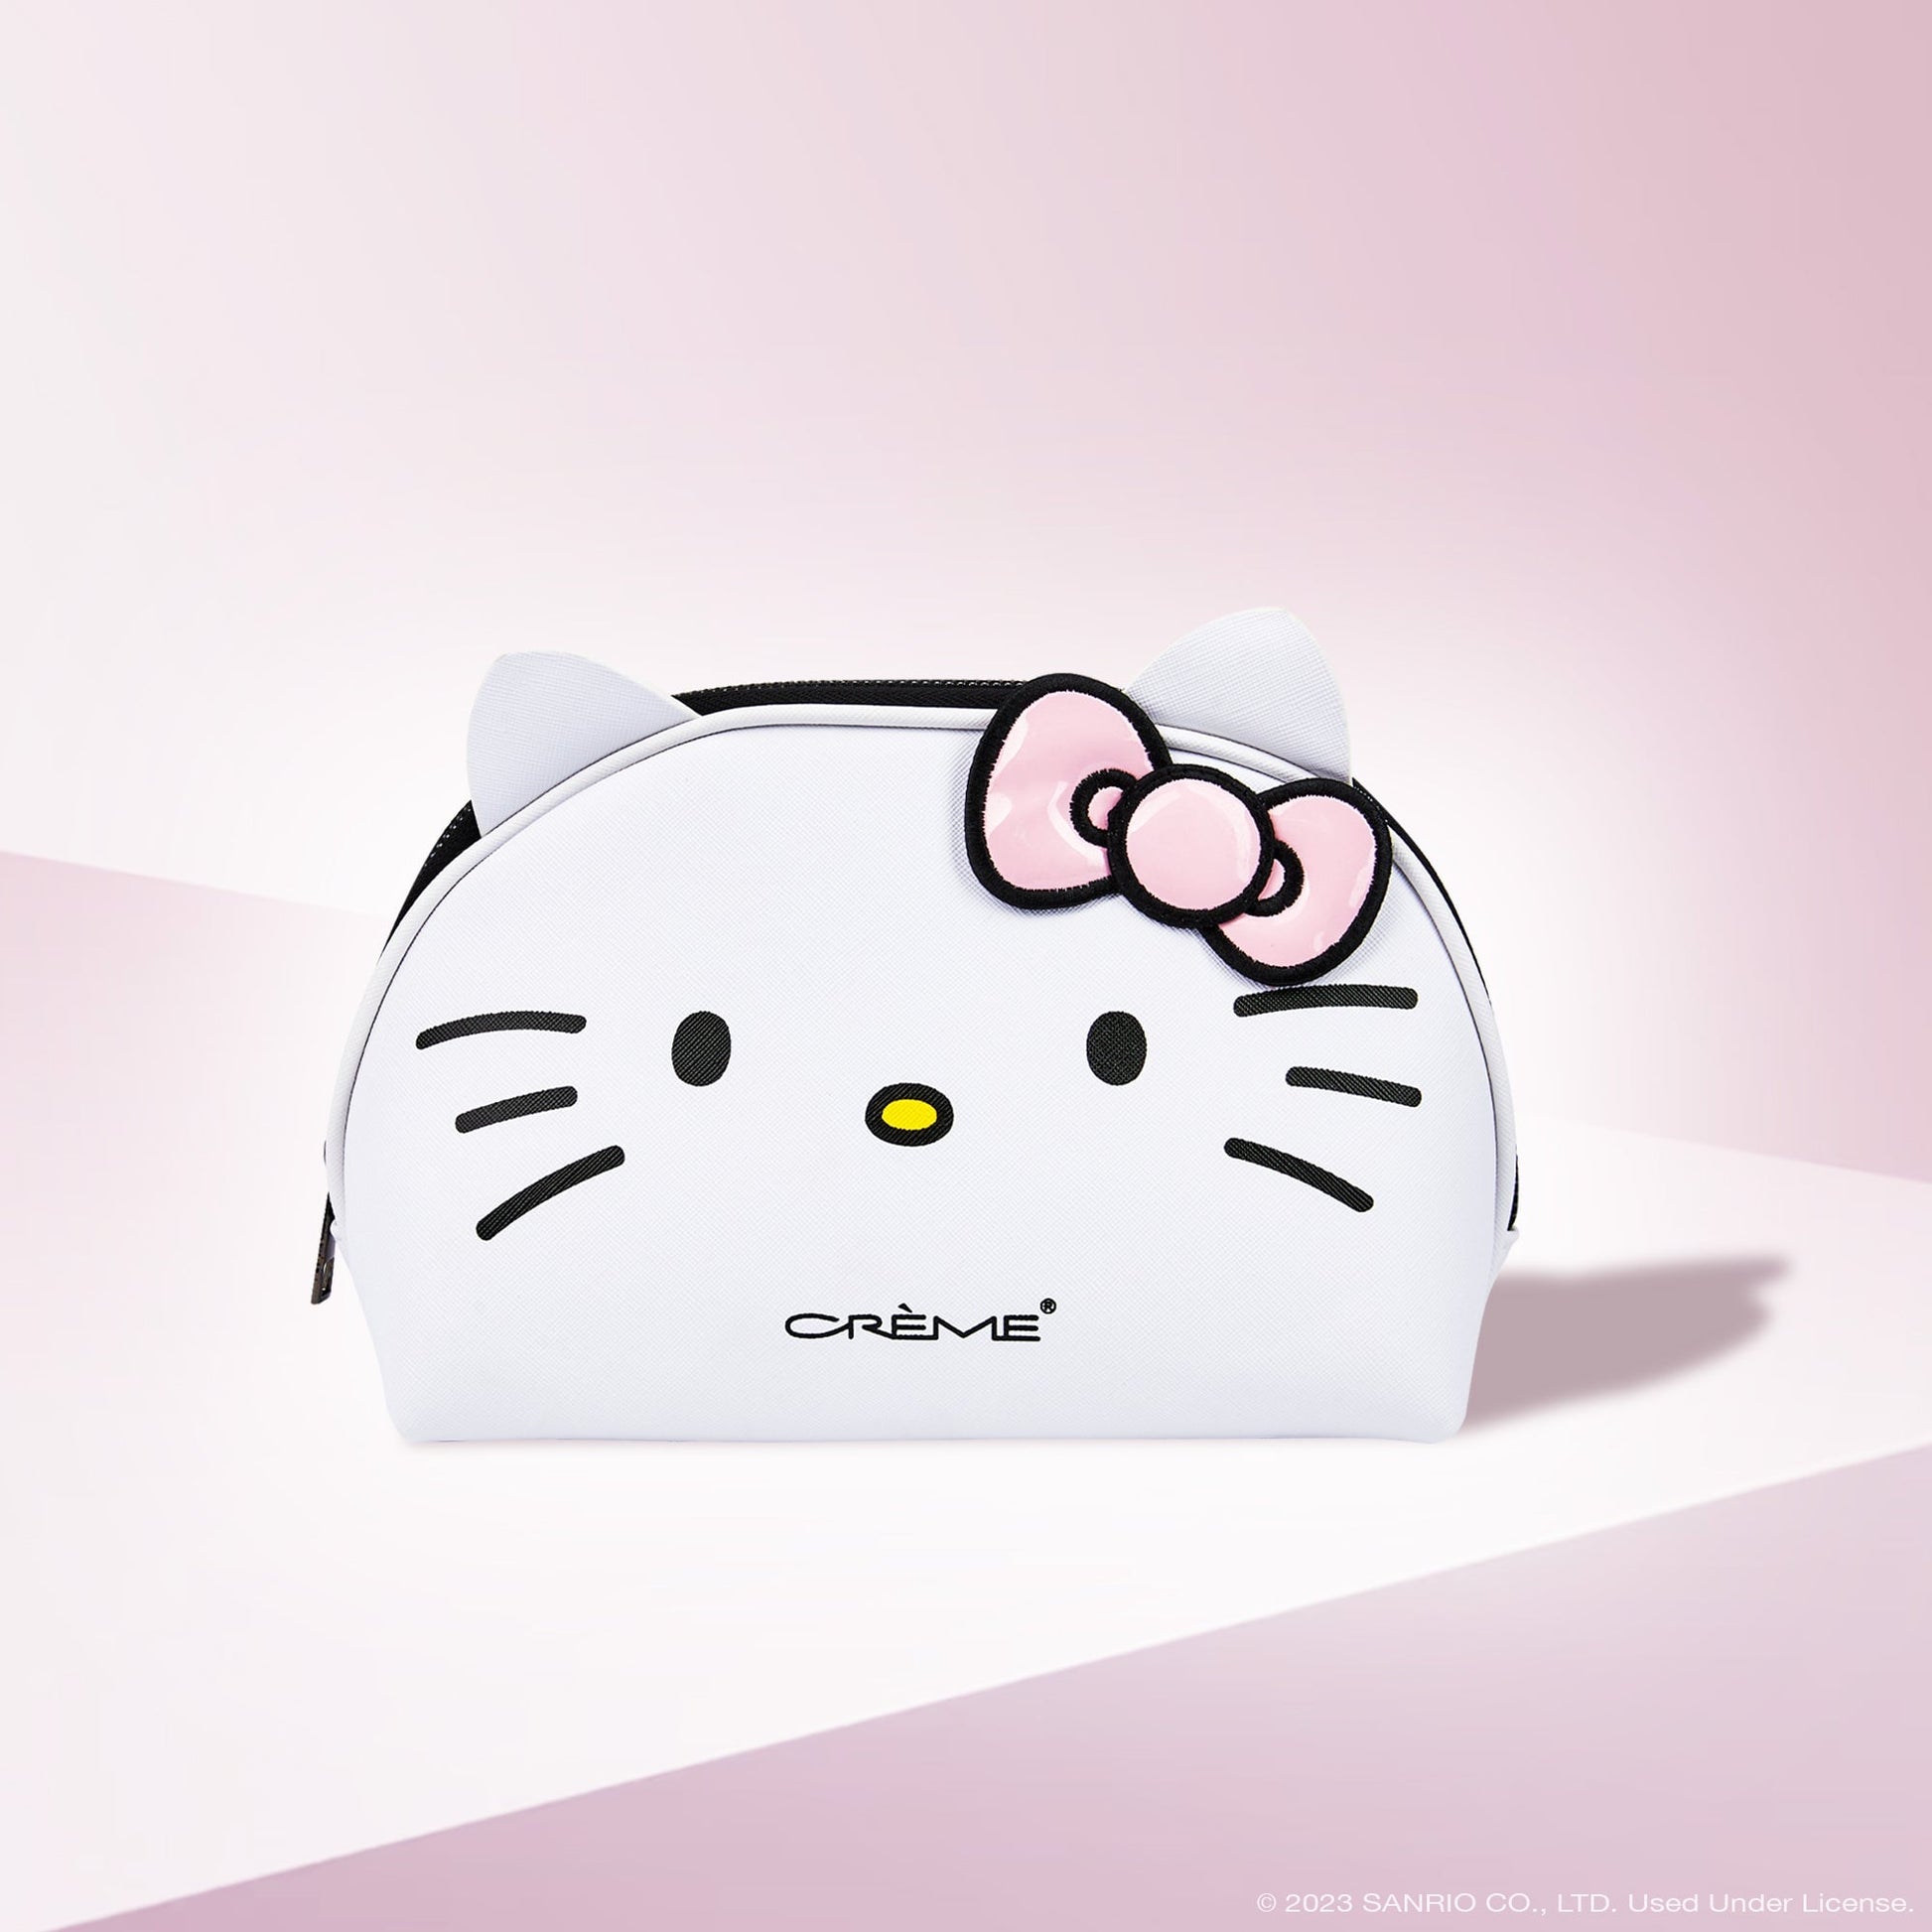 THE CREME SHOP X HELLO KITTY MAKEUP BAG NEW WITH TAGS COSMETIC